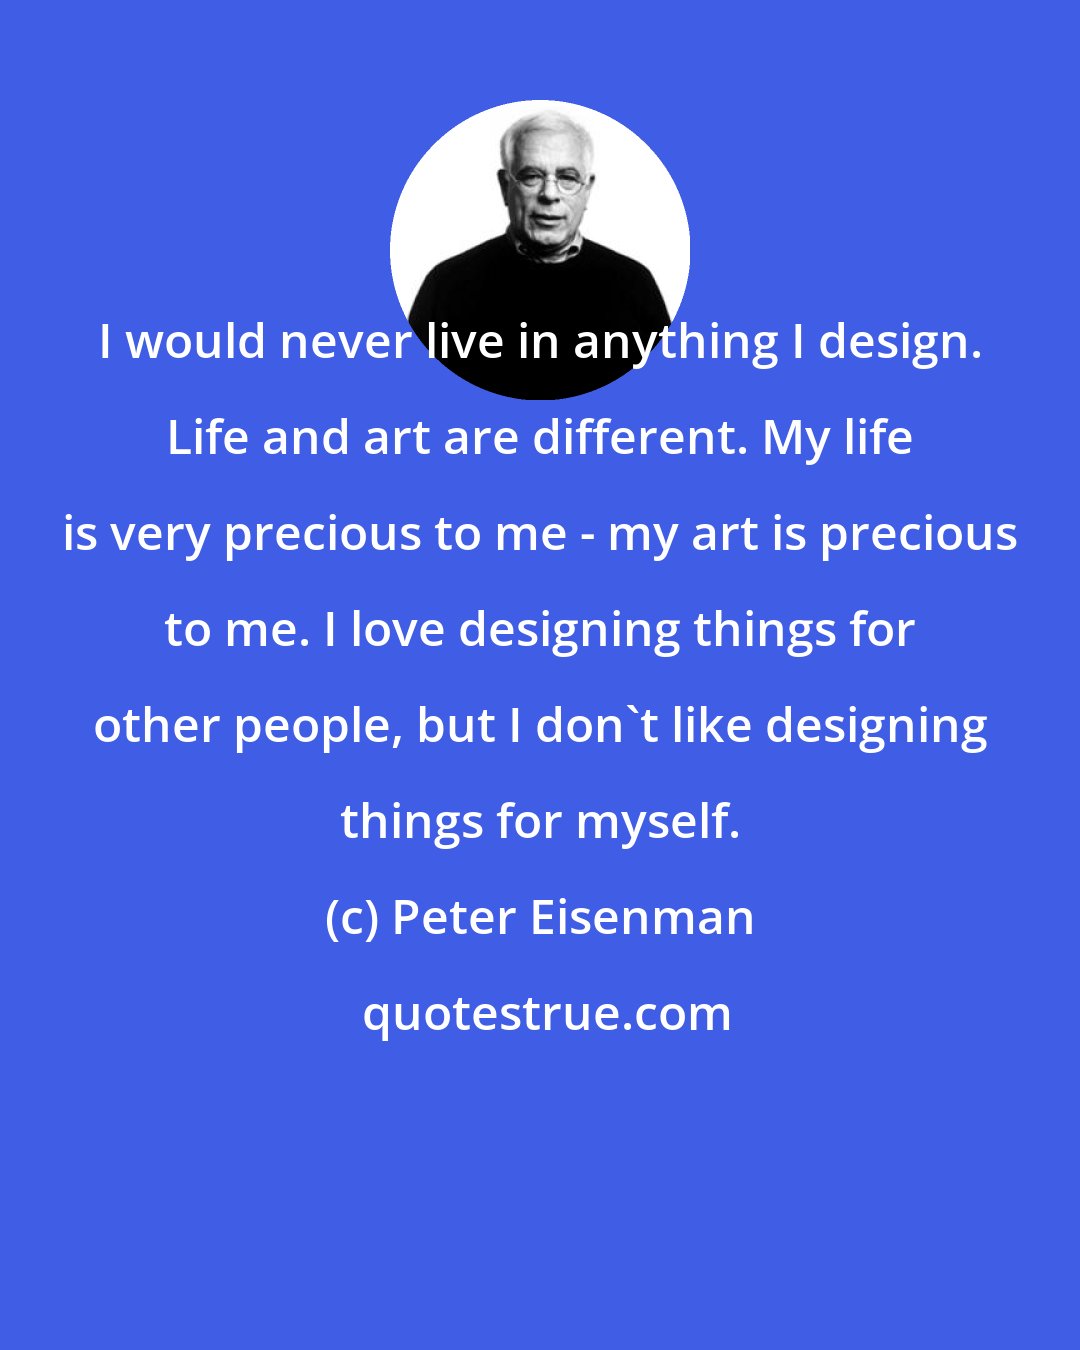 Peter Eisenman: I would never live in anything I design. Life and art are different. My life is very precious to me - my art is precious to me. I love designing things for other people, but I don't like designing things for myself.